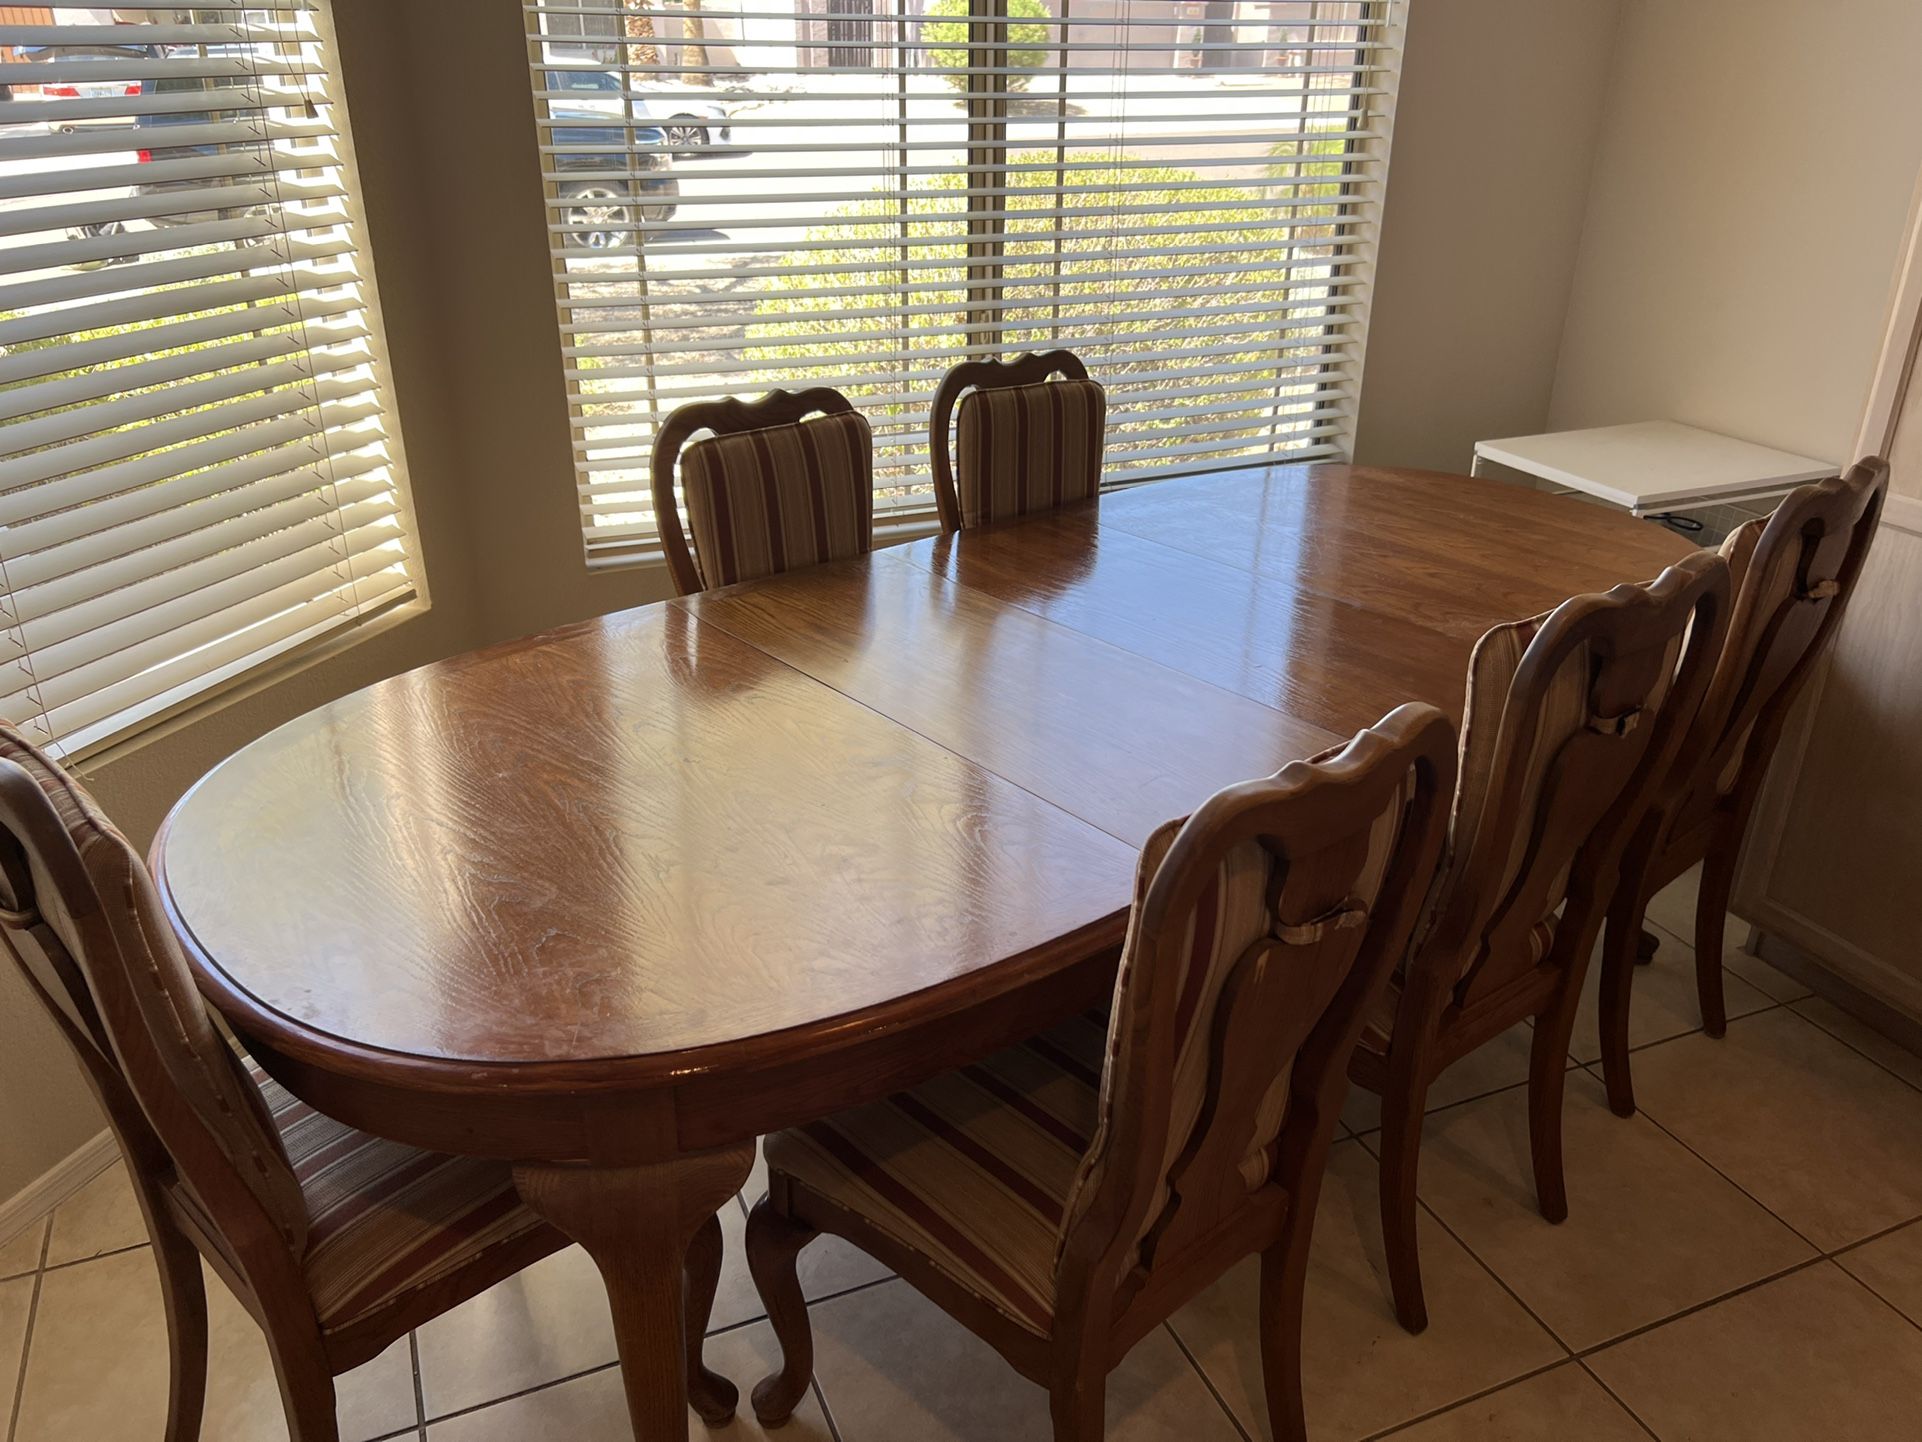 FREE 8 Foot Kitchen  Table With 6 Chairs  NEED GONE Within The Hour 